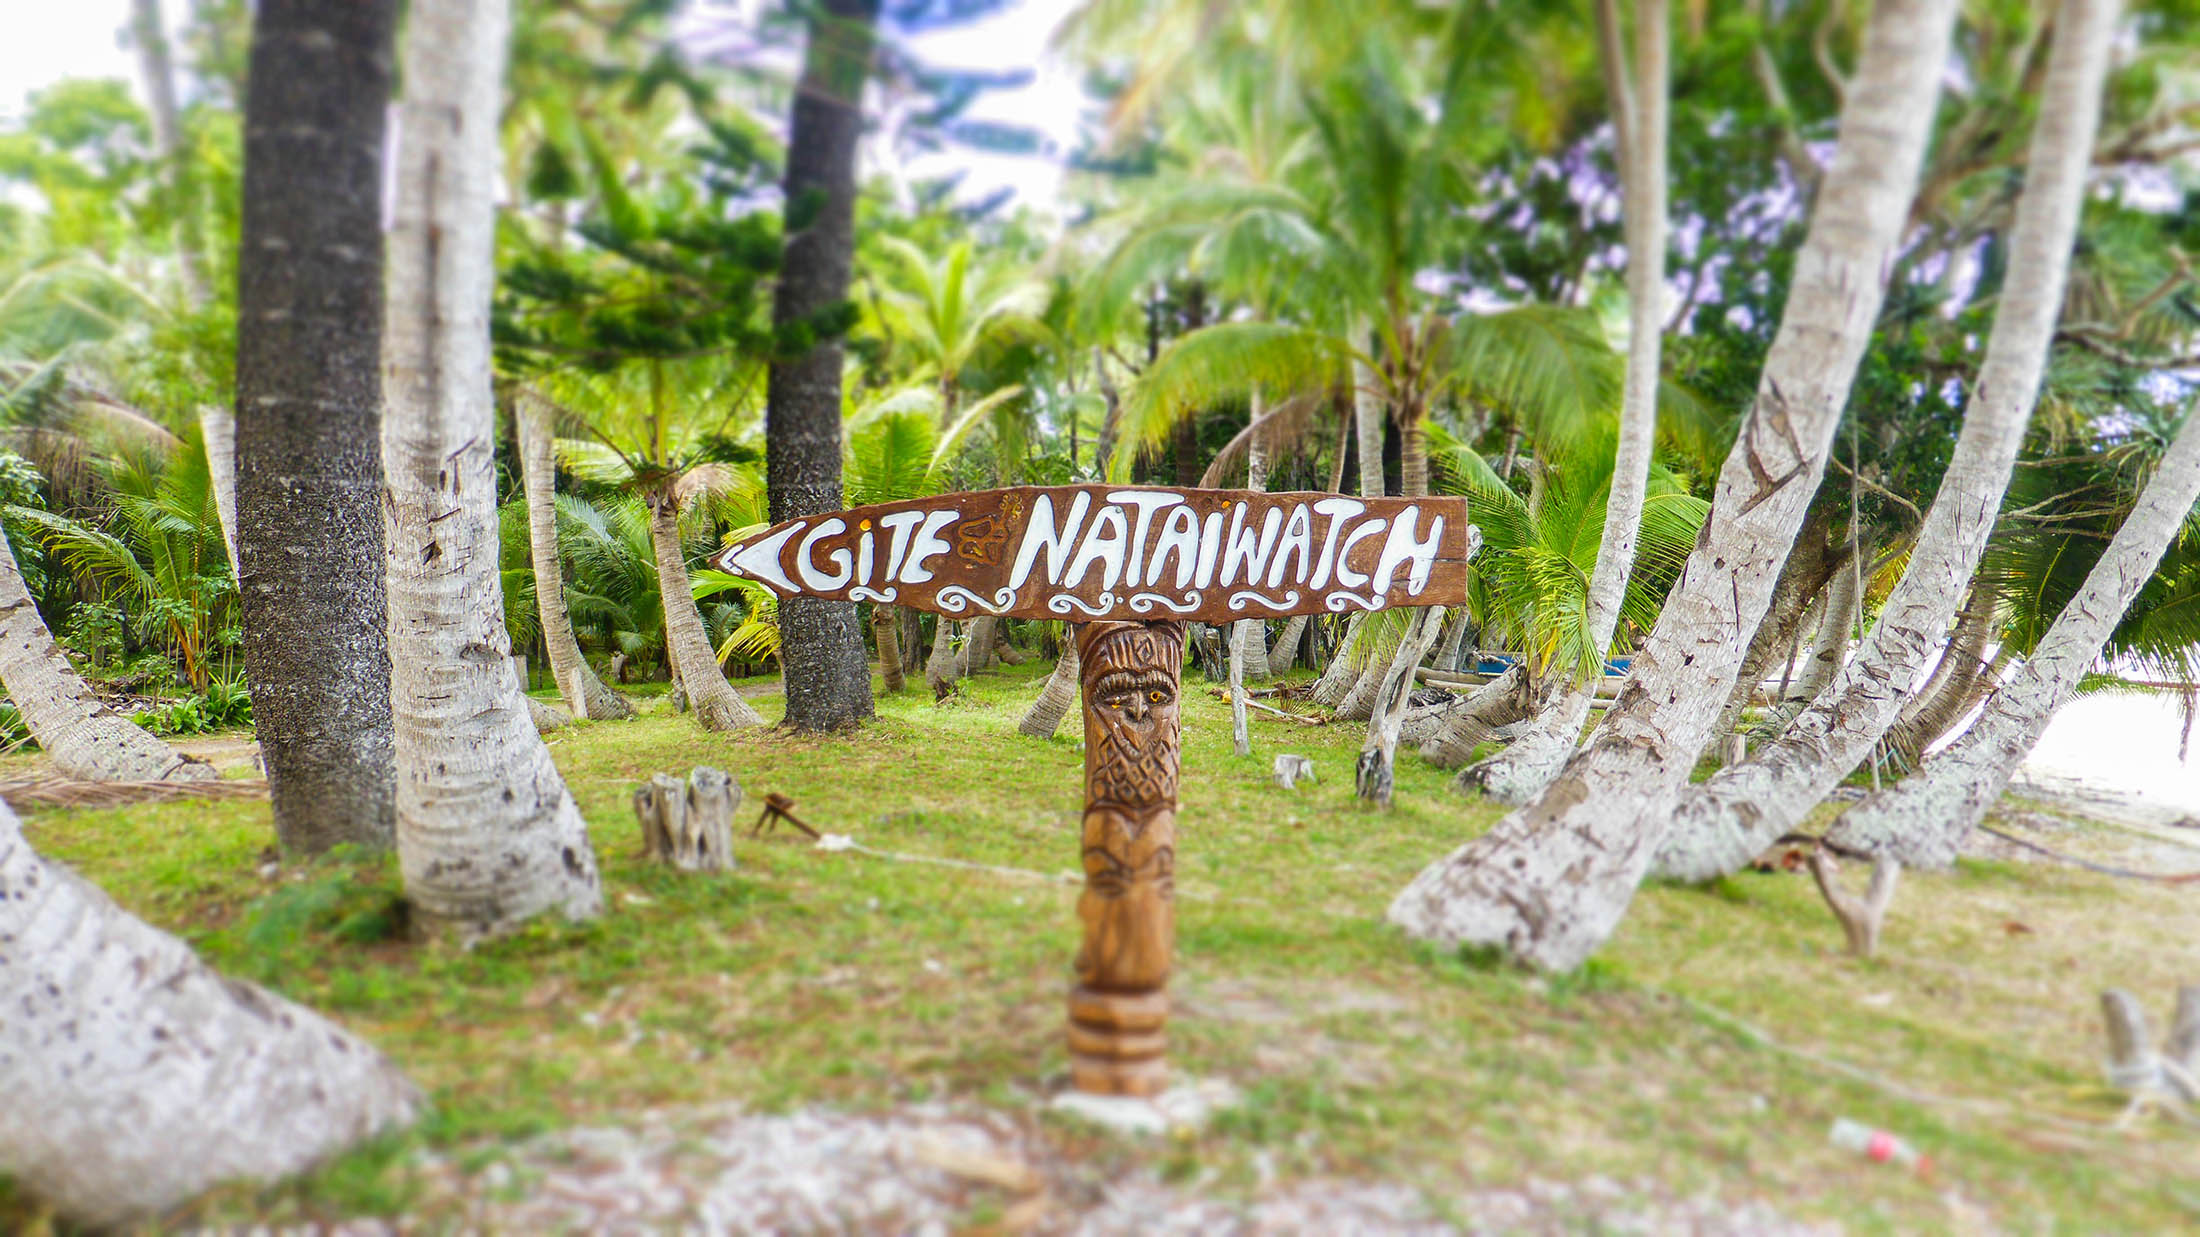 Nataiwatch camping on Isle of Pines, New Caledonia